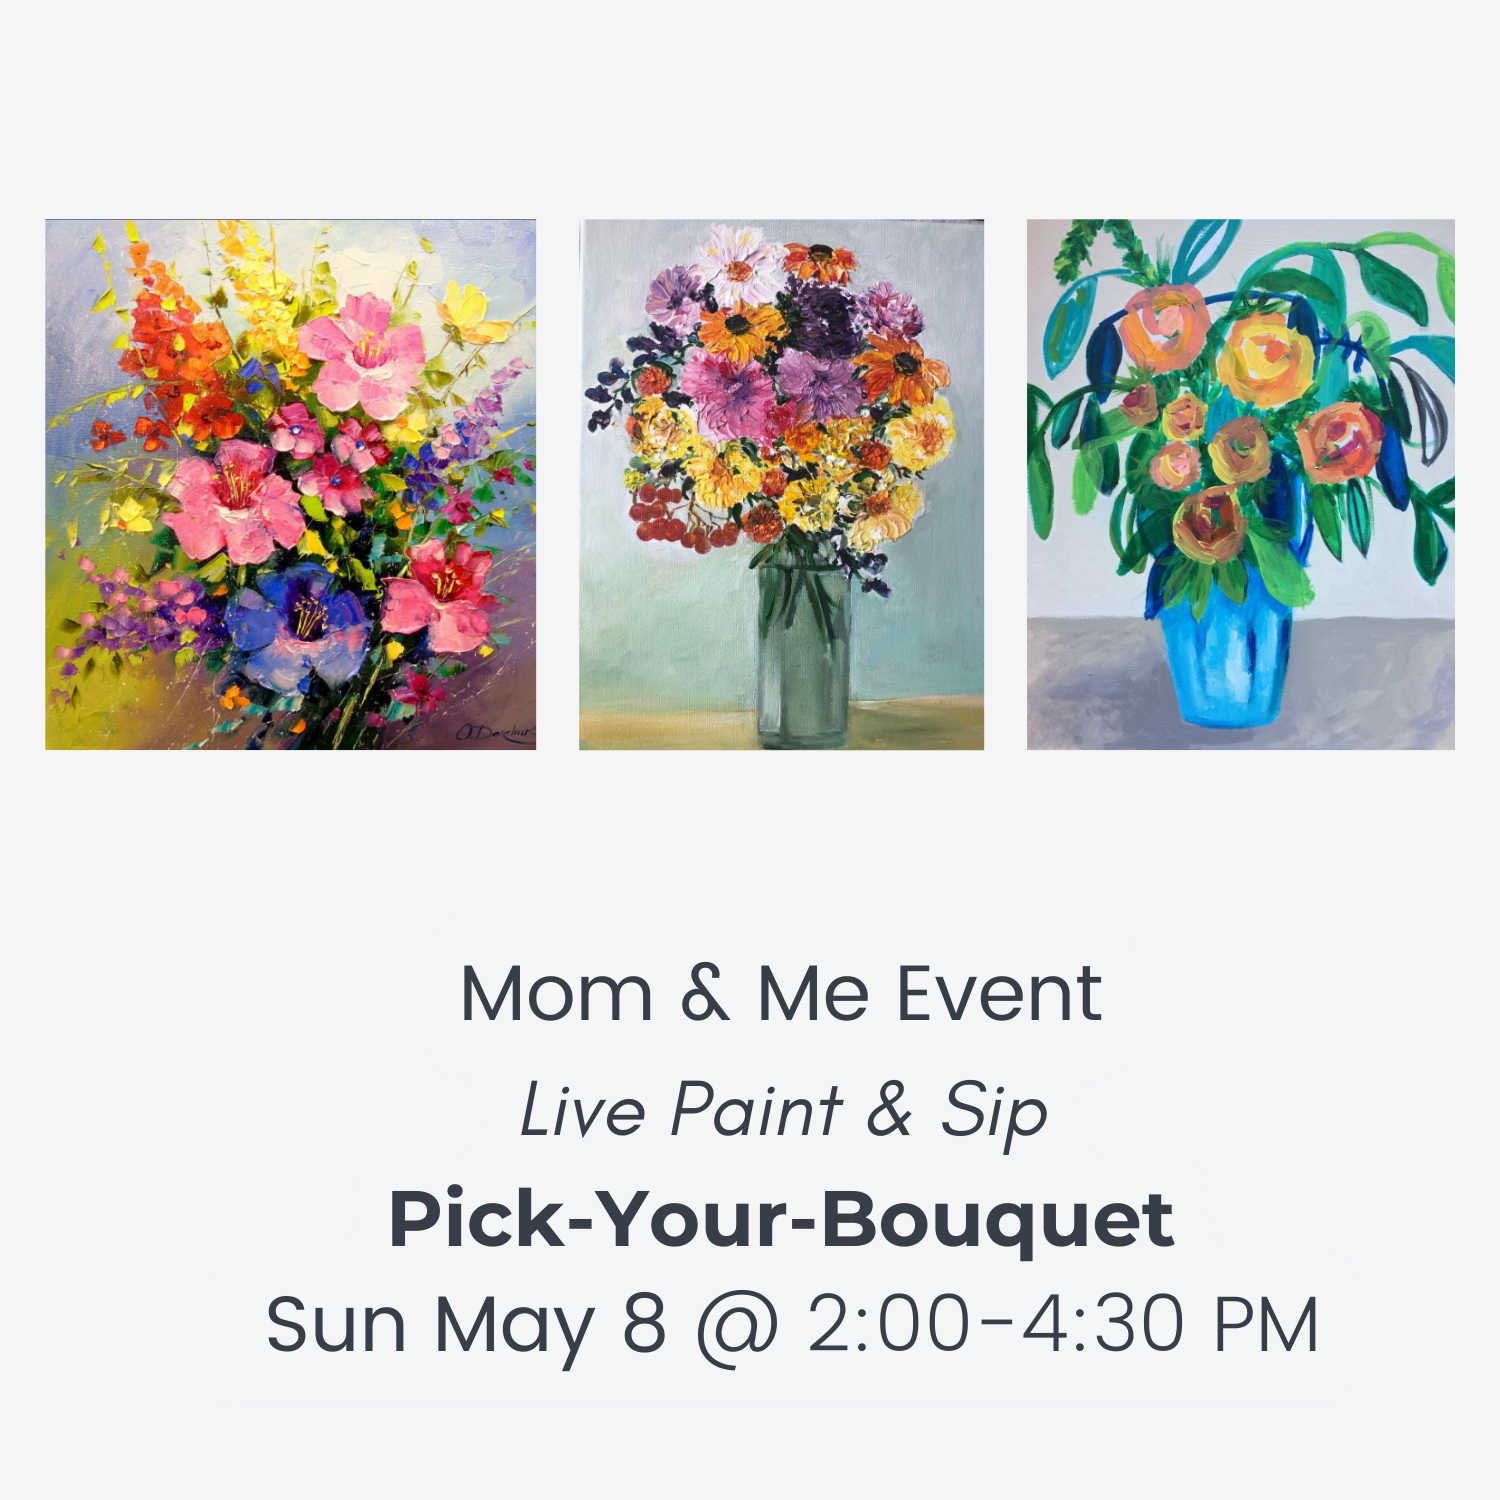 Mom & Me Event: Pick-Your-Bouquet - Sun May 8 @ 2:00-4:30